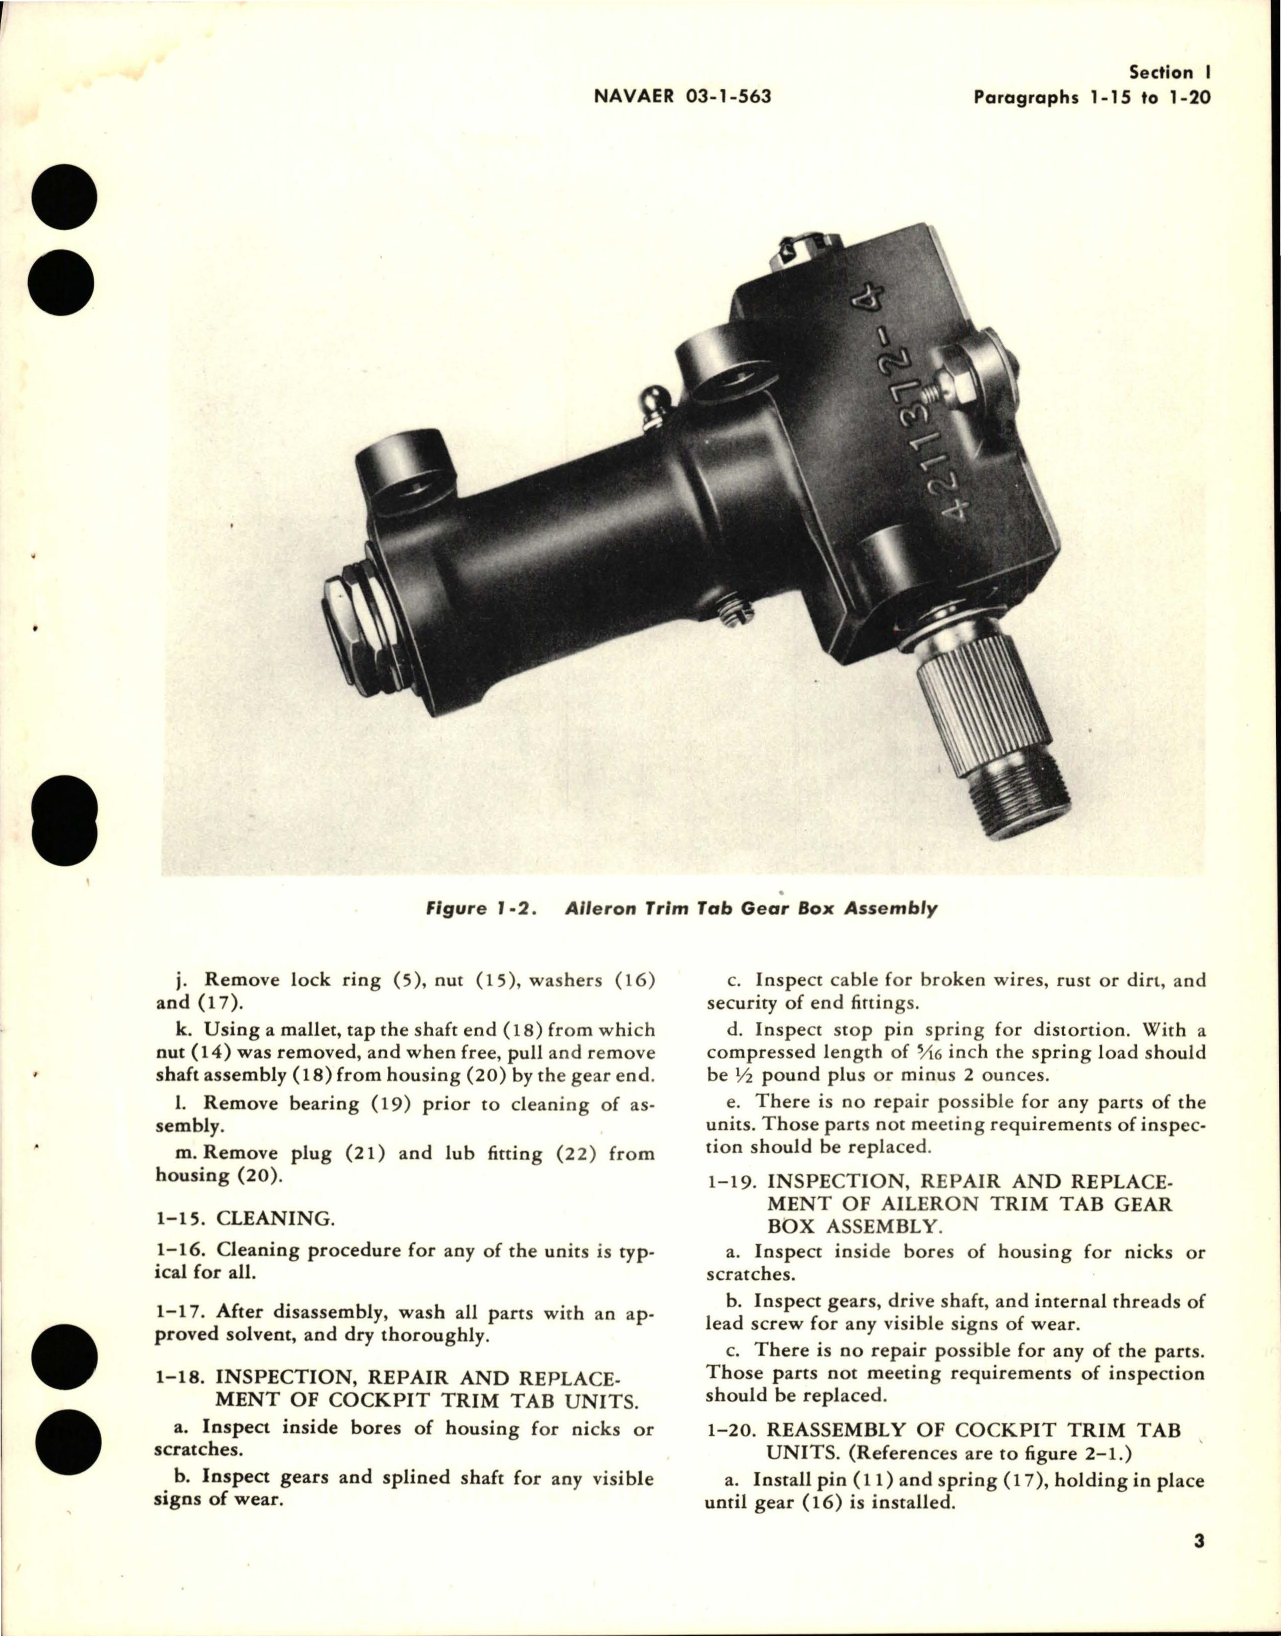 Sample page 5 from AirCorps Library document: Overhaul Instructions with Parts Catalog for Aileron and Rudder Cockpit Trim Tab Units and Aileron Trim Tab Gear Box 